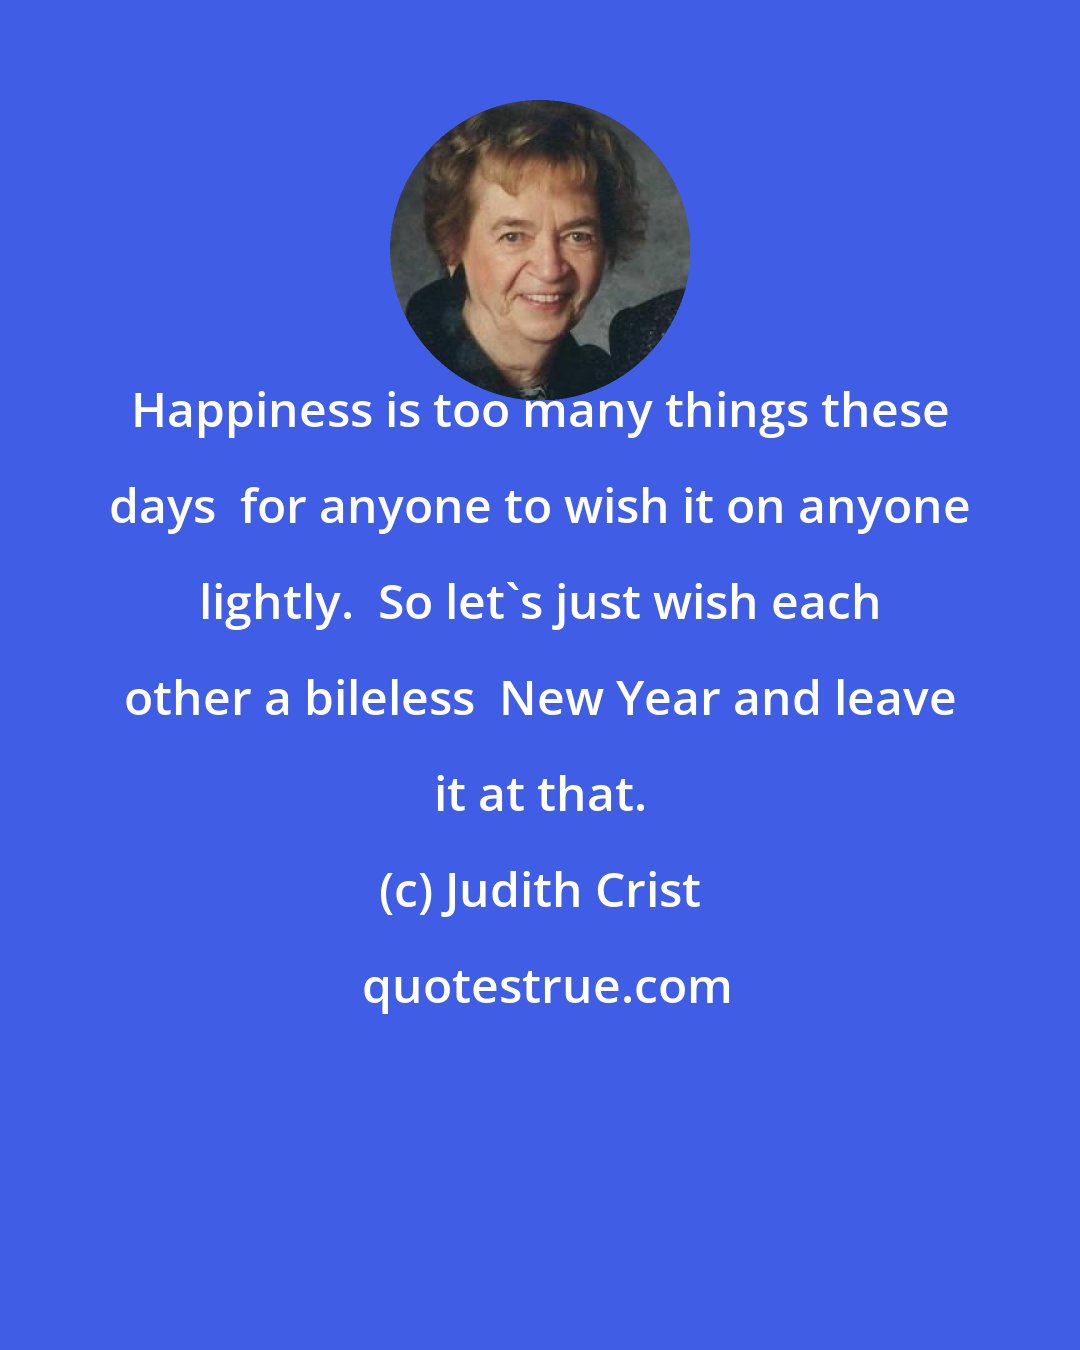 Judith Crist: Happiness is too many things these days  for anyone to wish it on anyone lightly.  So let's just wish each other a bileless  New Year and leave it at that.